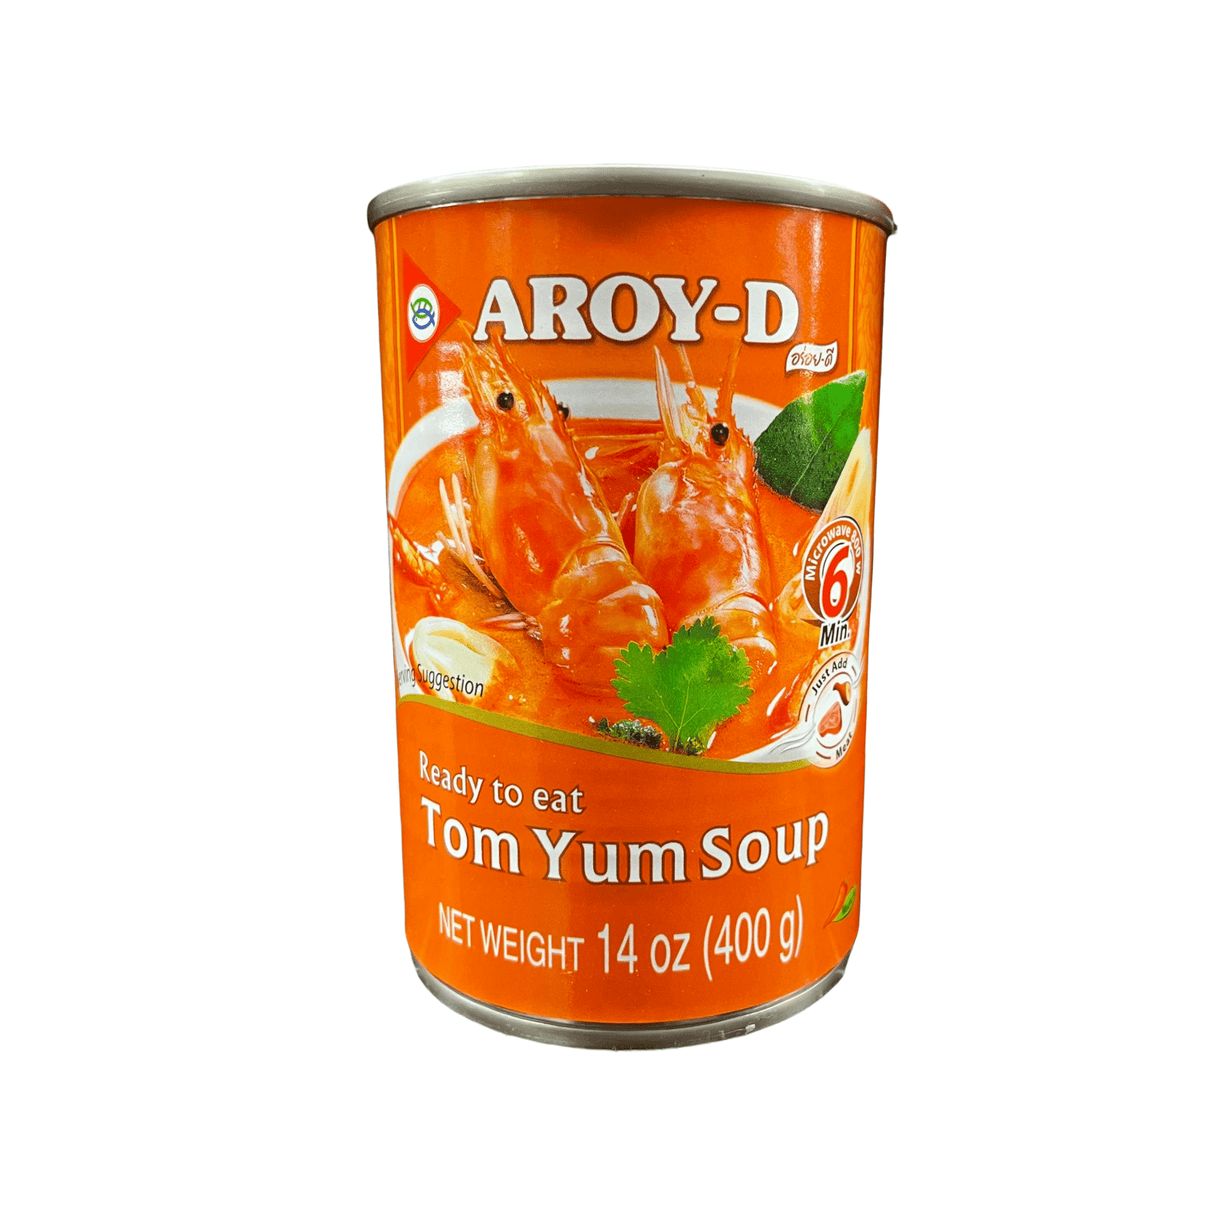 Aroy-d Tom Yum Soup Ready to Eat